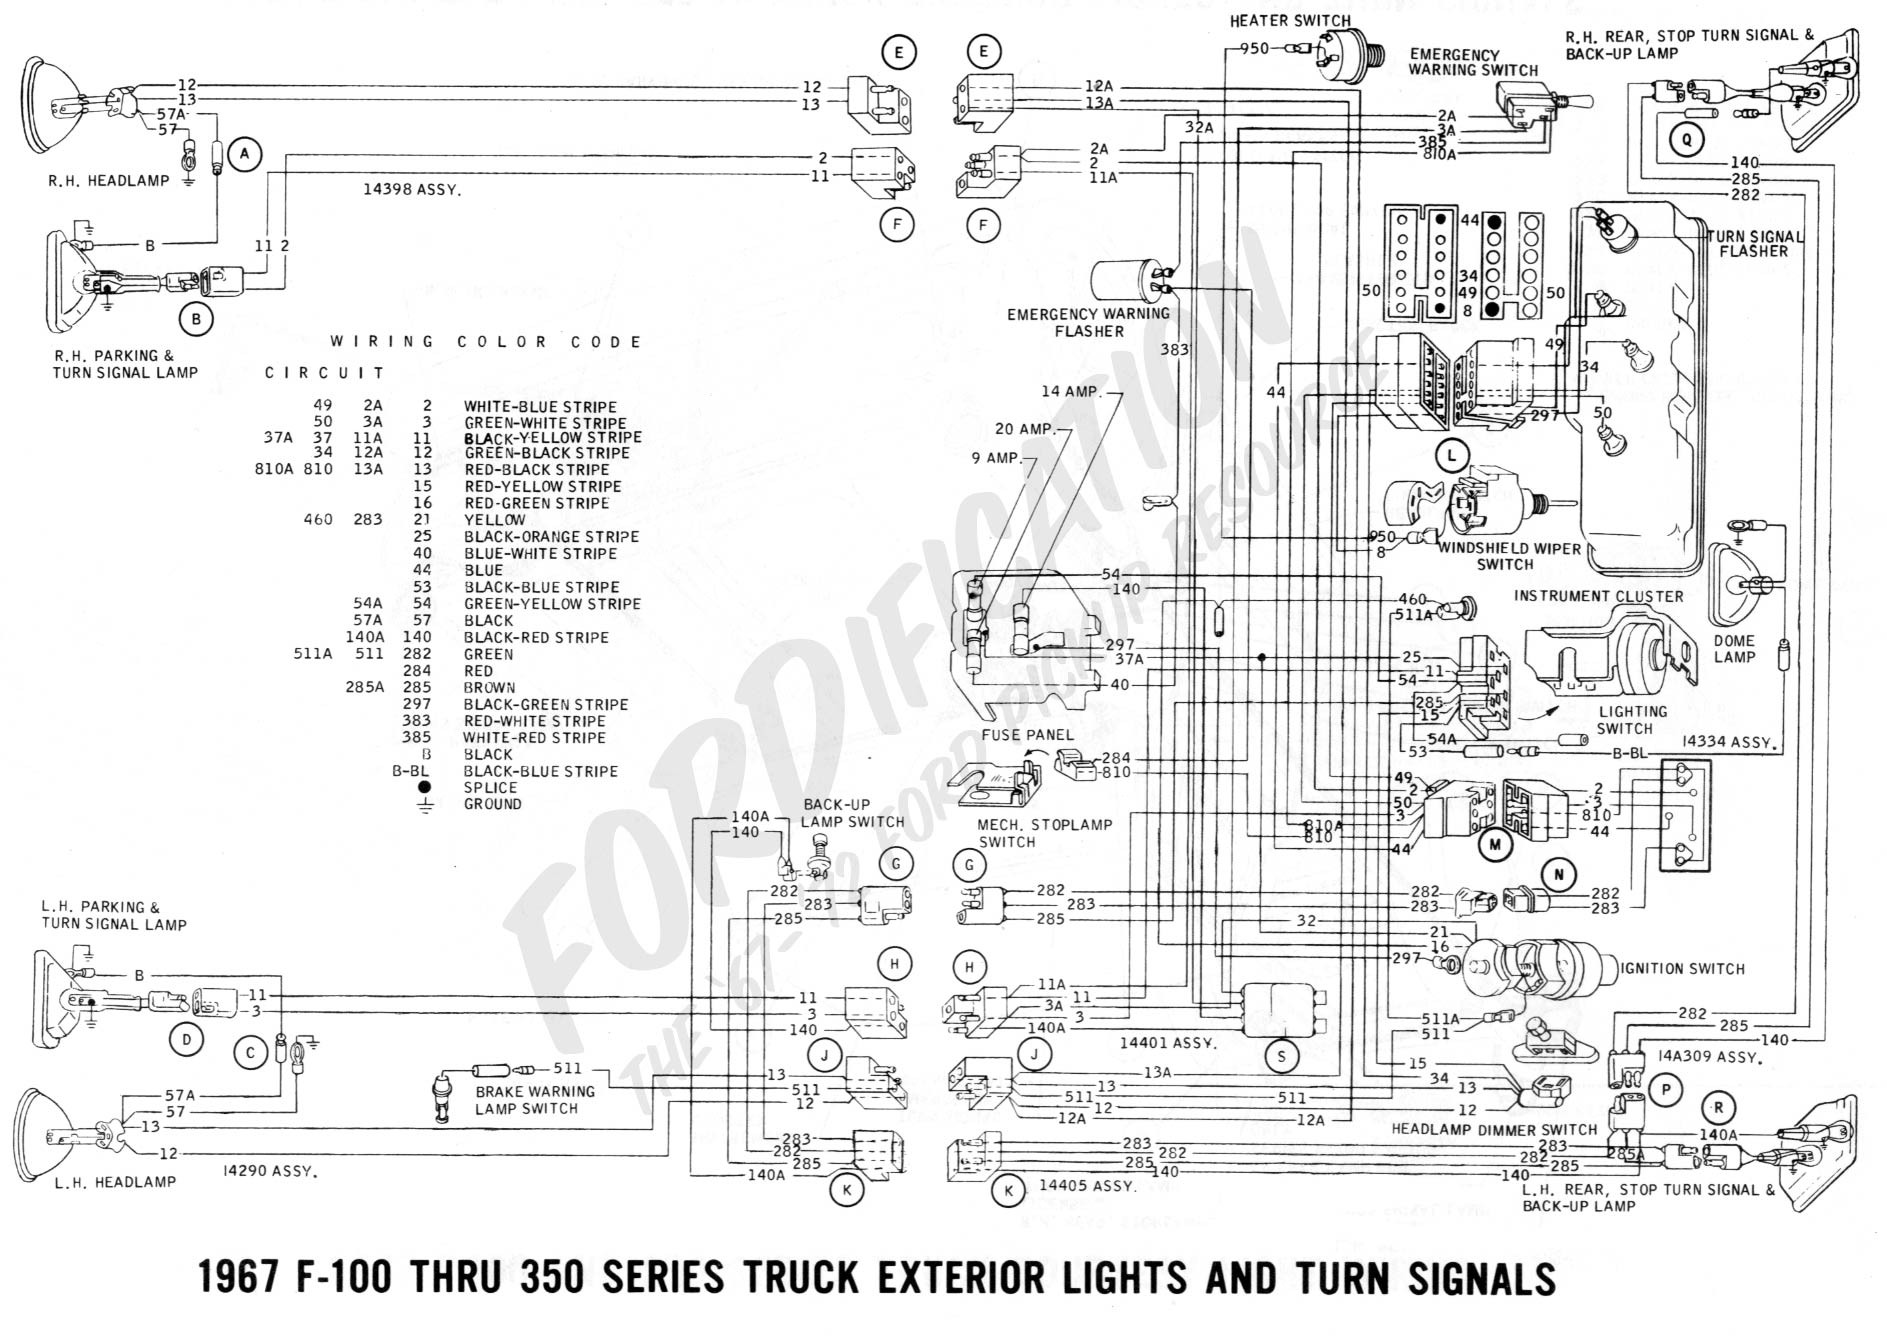 Wiring Diagram for ford F150 Trailer Lights From Truck ford Truck Technical Drawings and Schematics Section H Wiring Of Wiring Diagram for ford F150 Trailer Lights From Truck